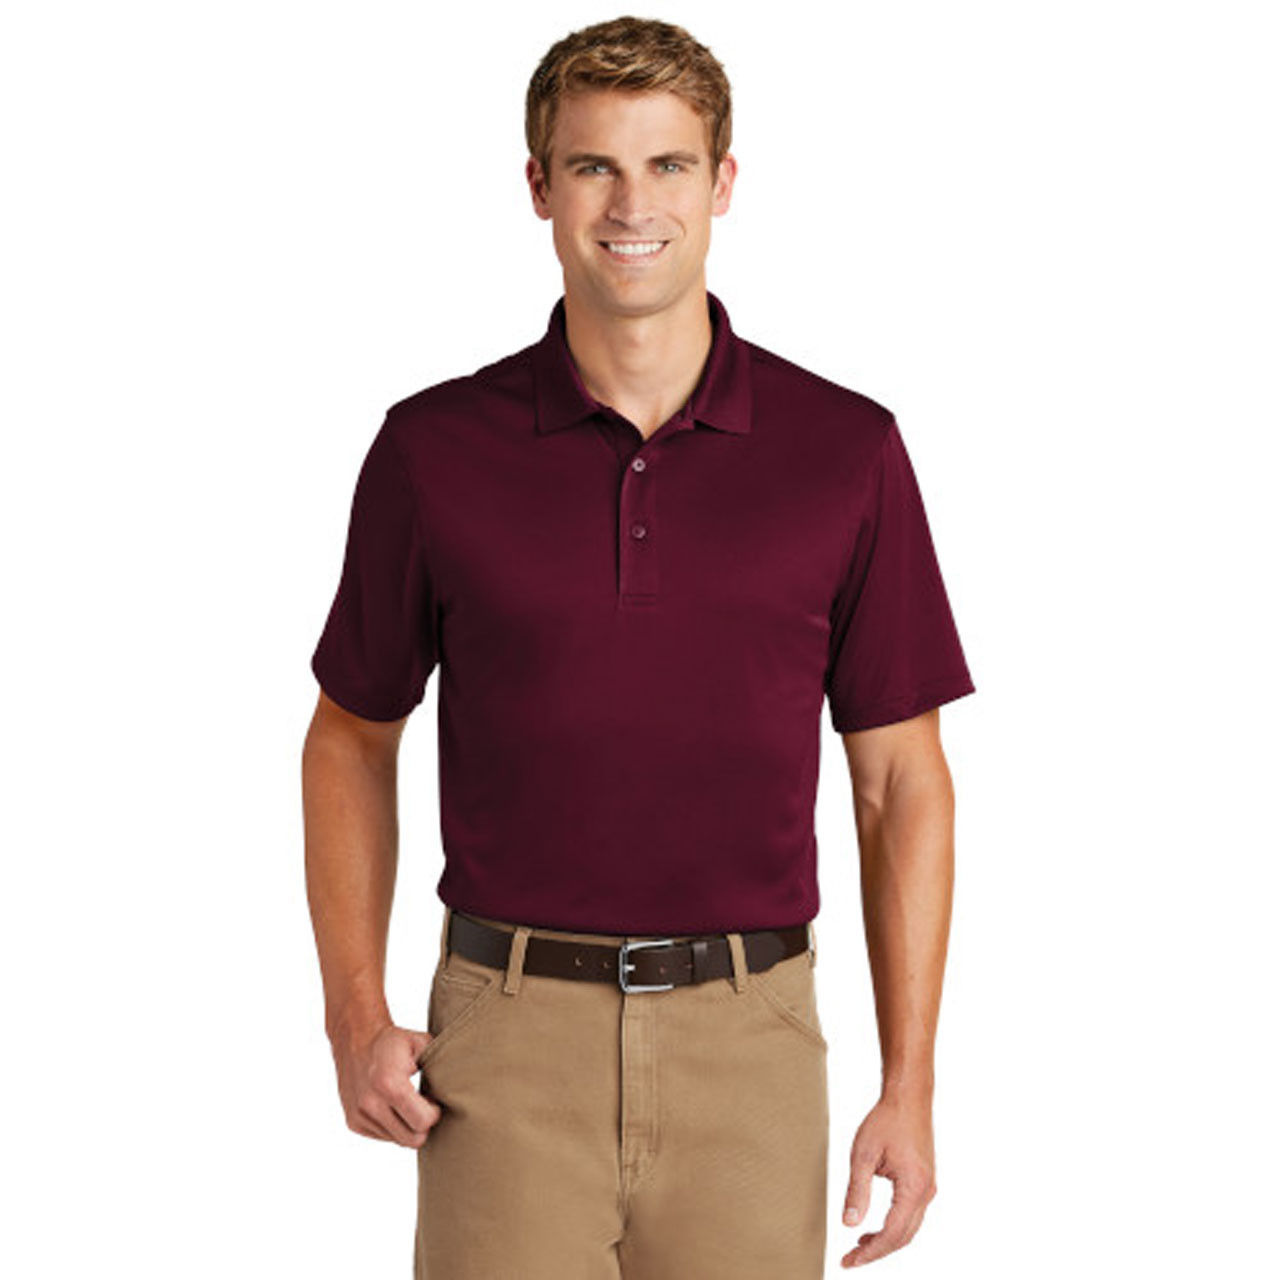 What type of sleeves does the men's maroon polo shirt have?